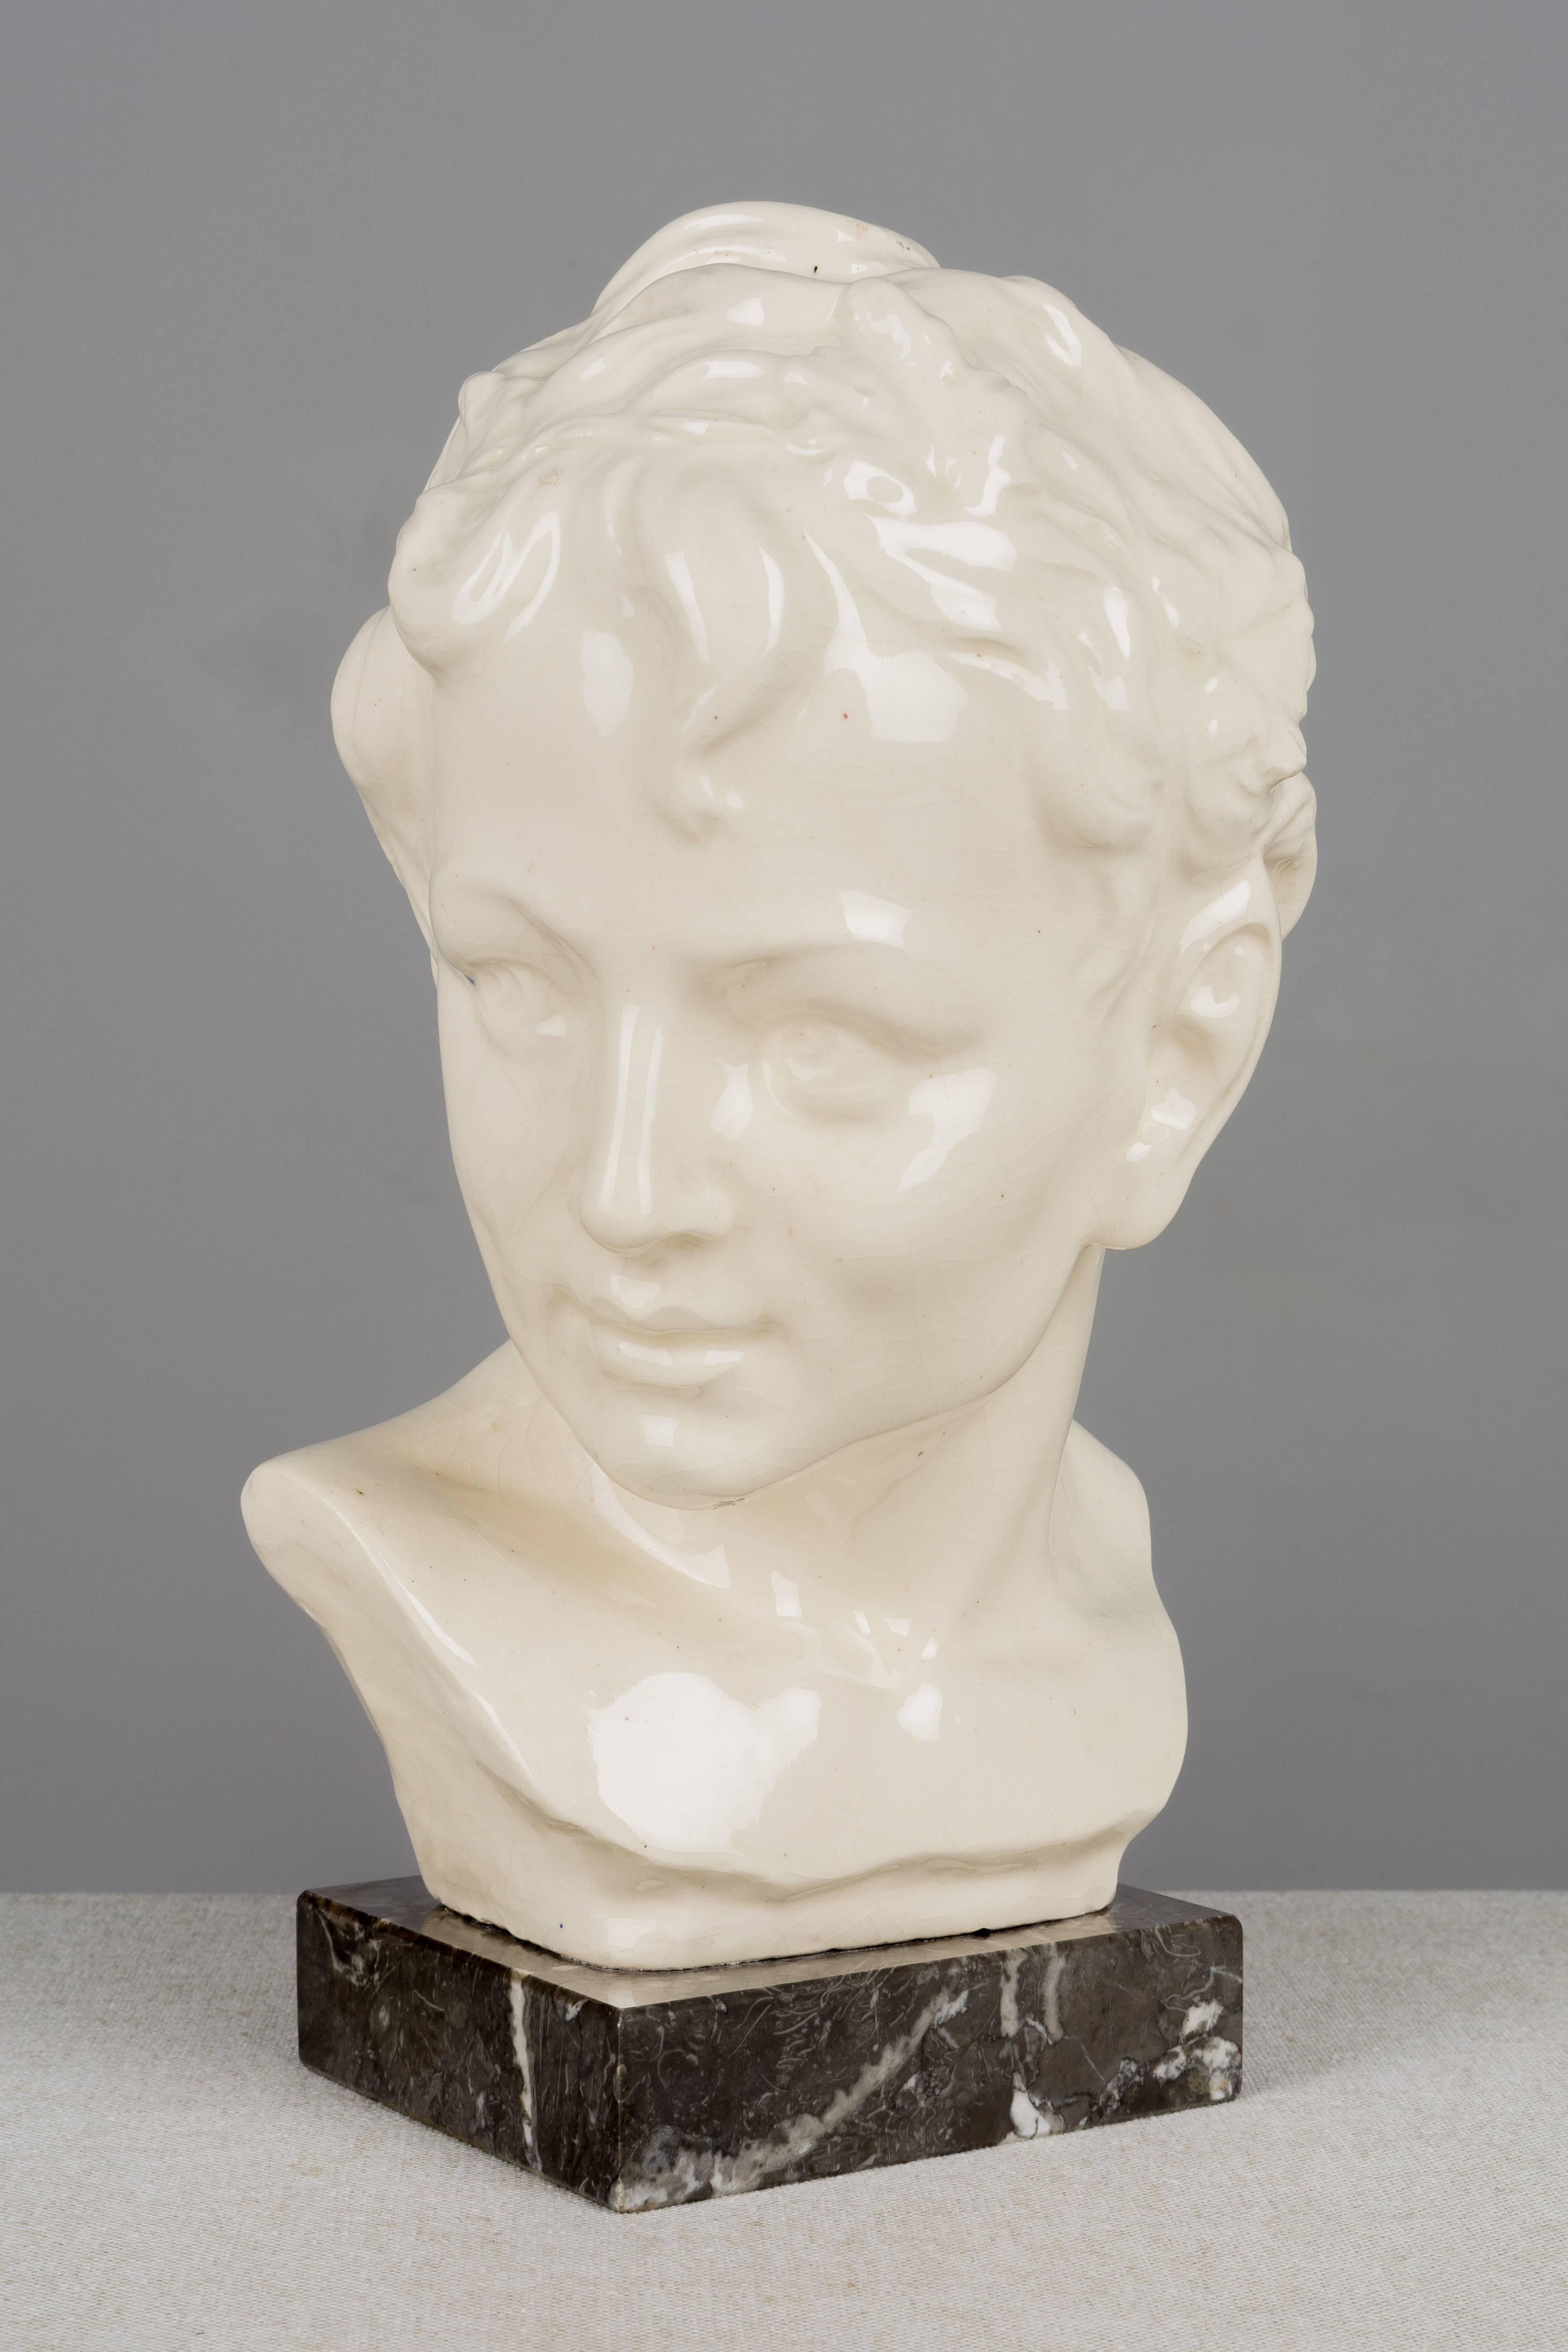 A French Art Deco craquelé ceramic bust of a young faun with pointed ears and a garland of leaves on his head. Marble base. Weight: 4.5 lbs. Please refer to photos for more details. We have a large selection of French antiques at Olivier Fleury,